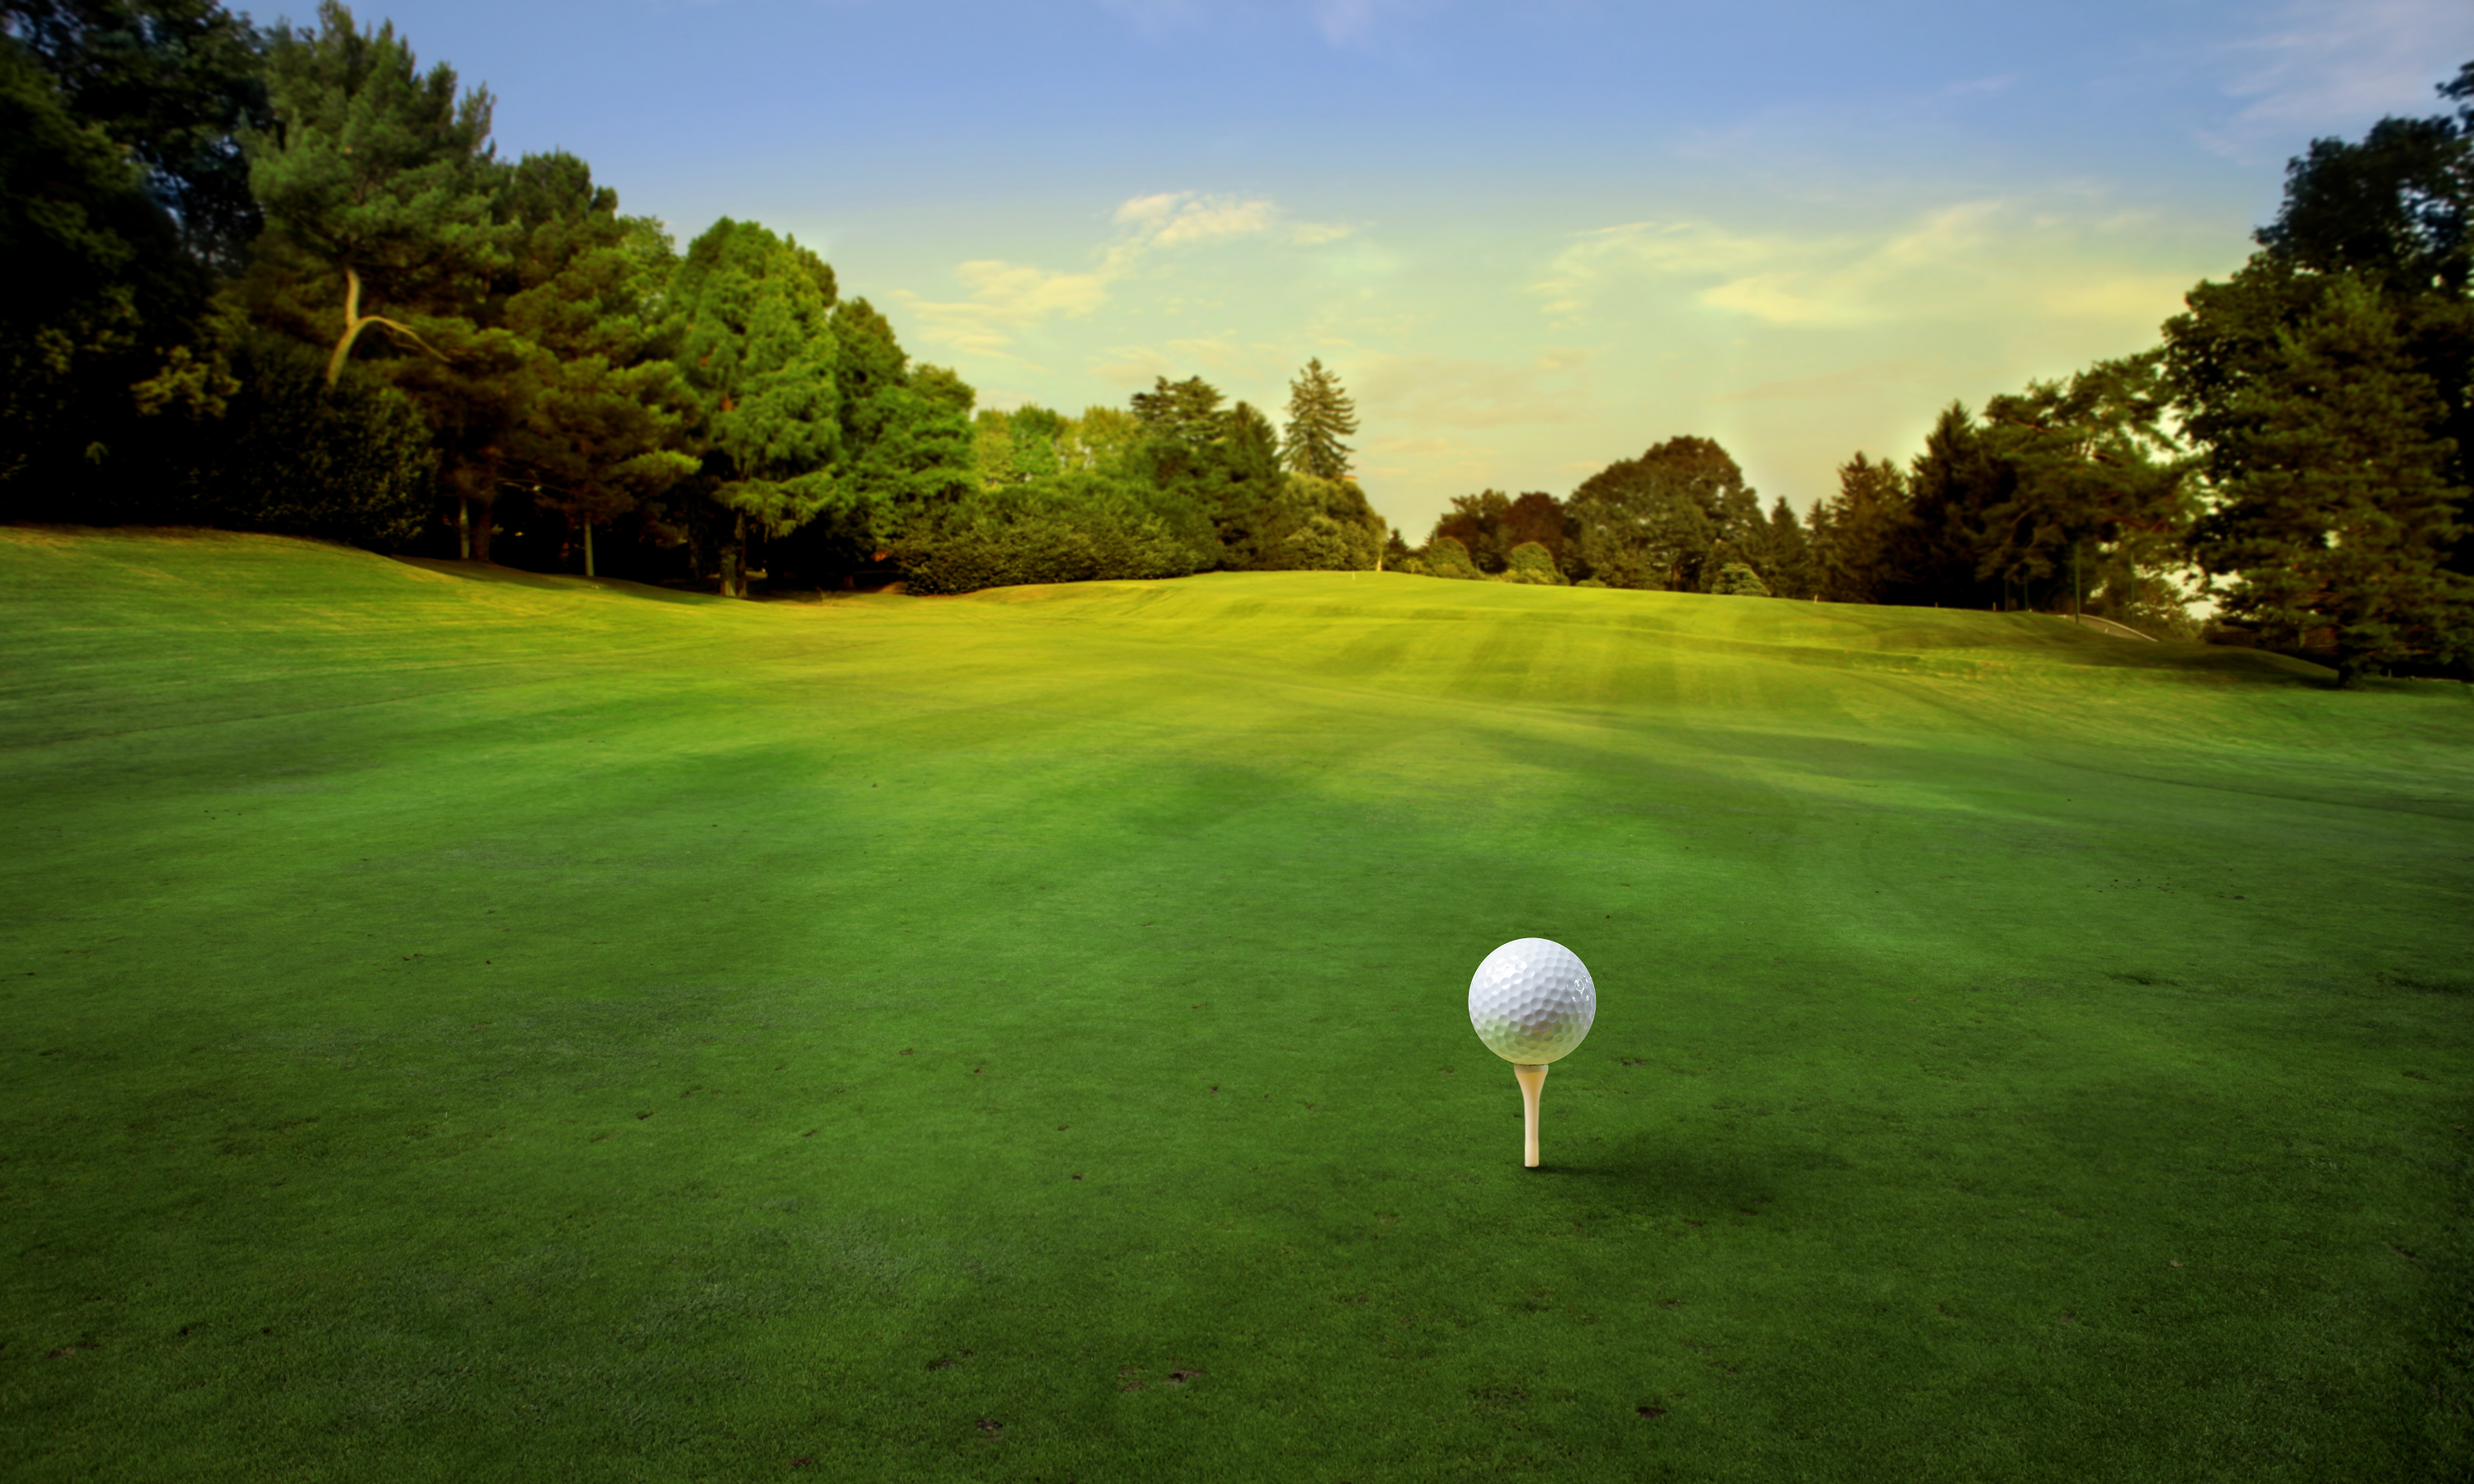 Golf course background